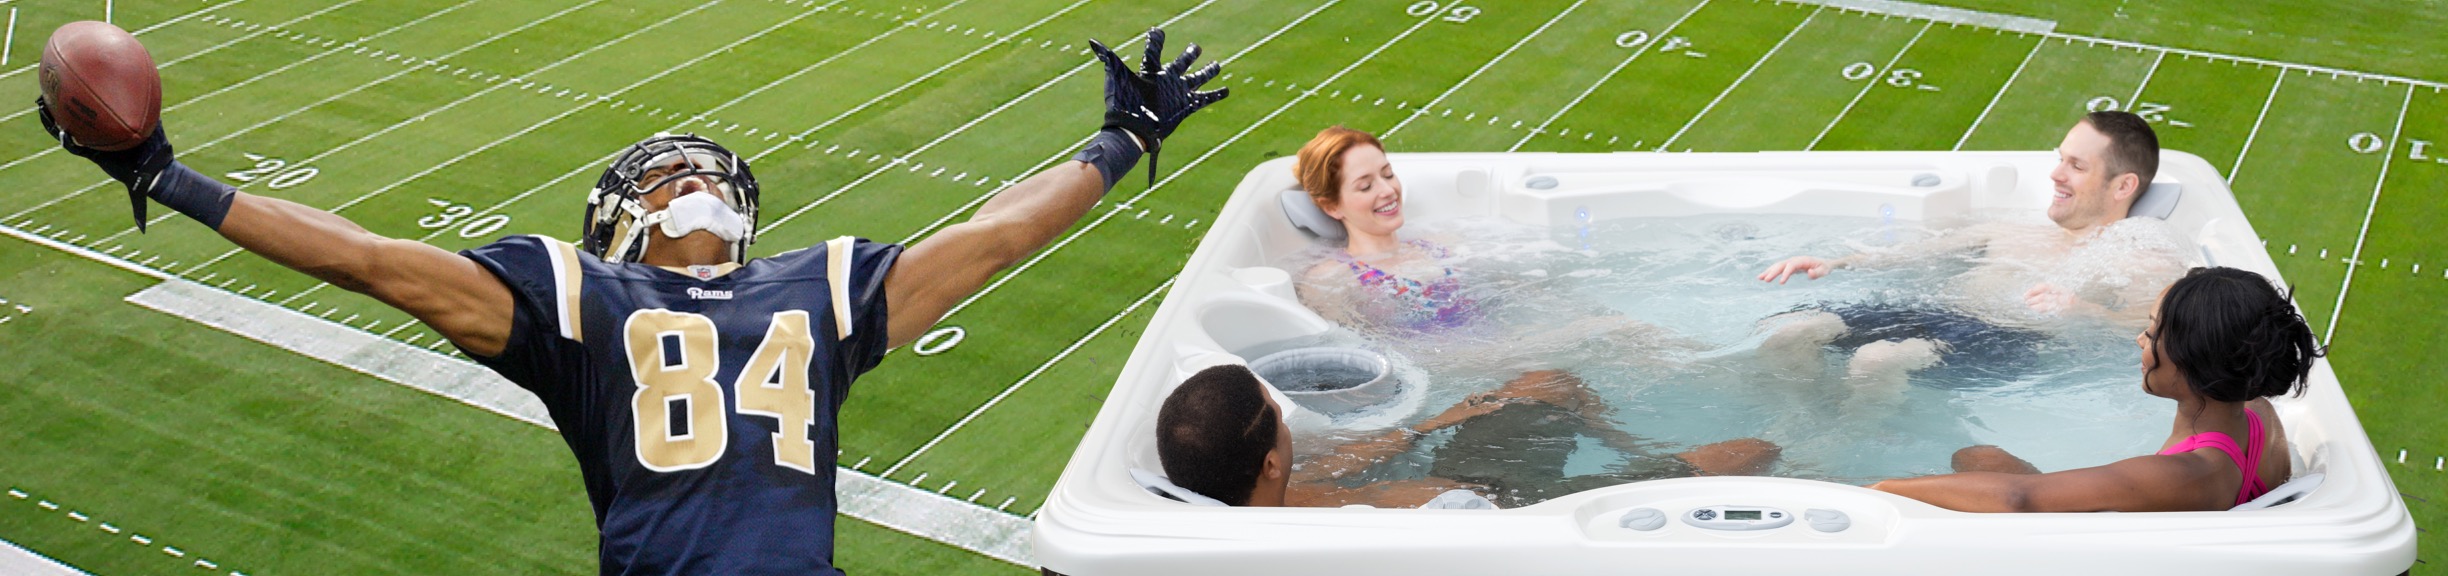 Hot Tub Super Bowl Party Time!